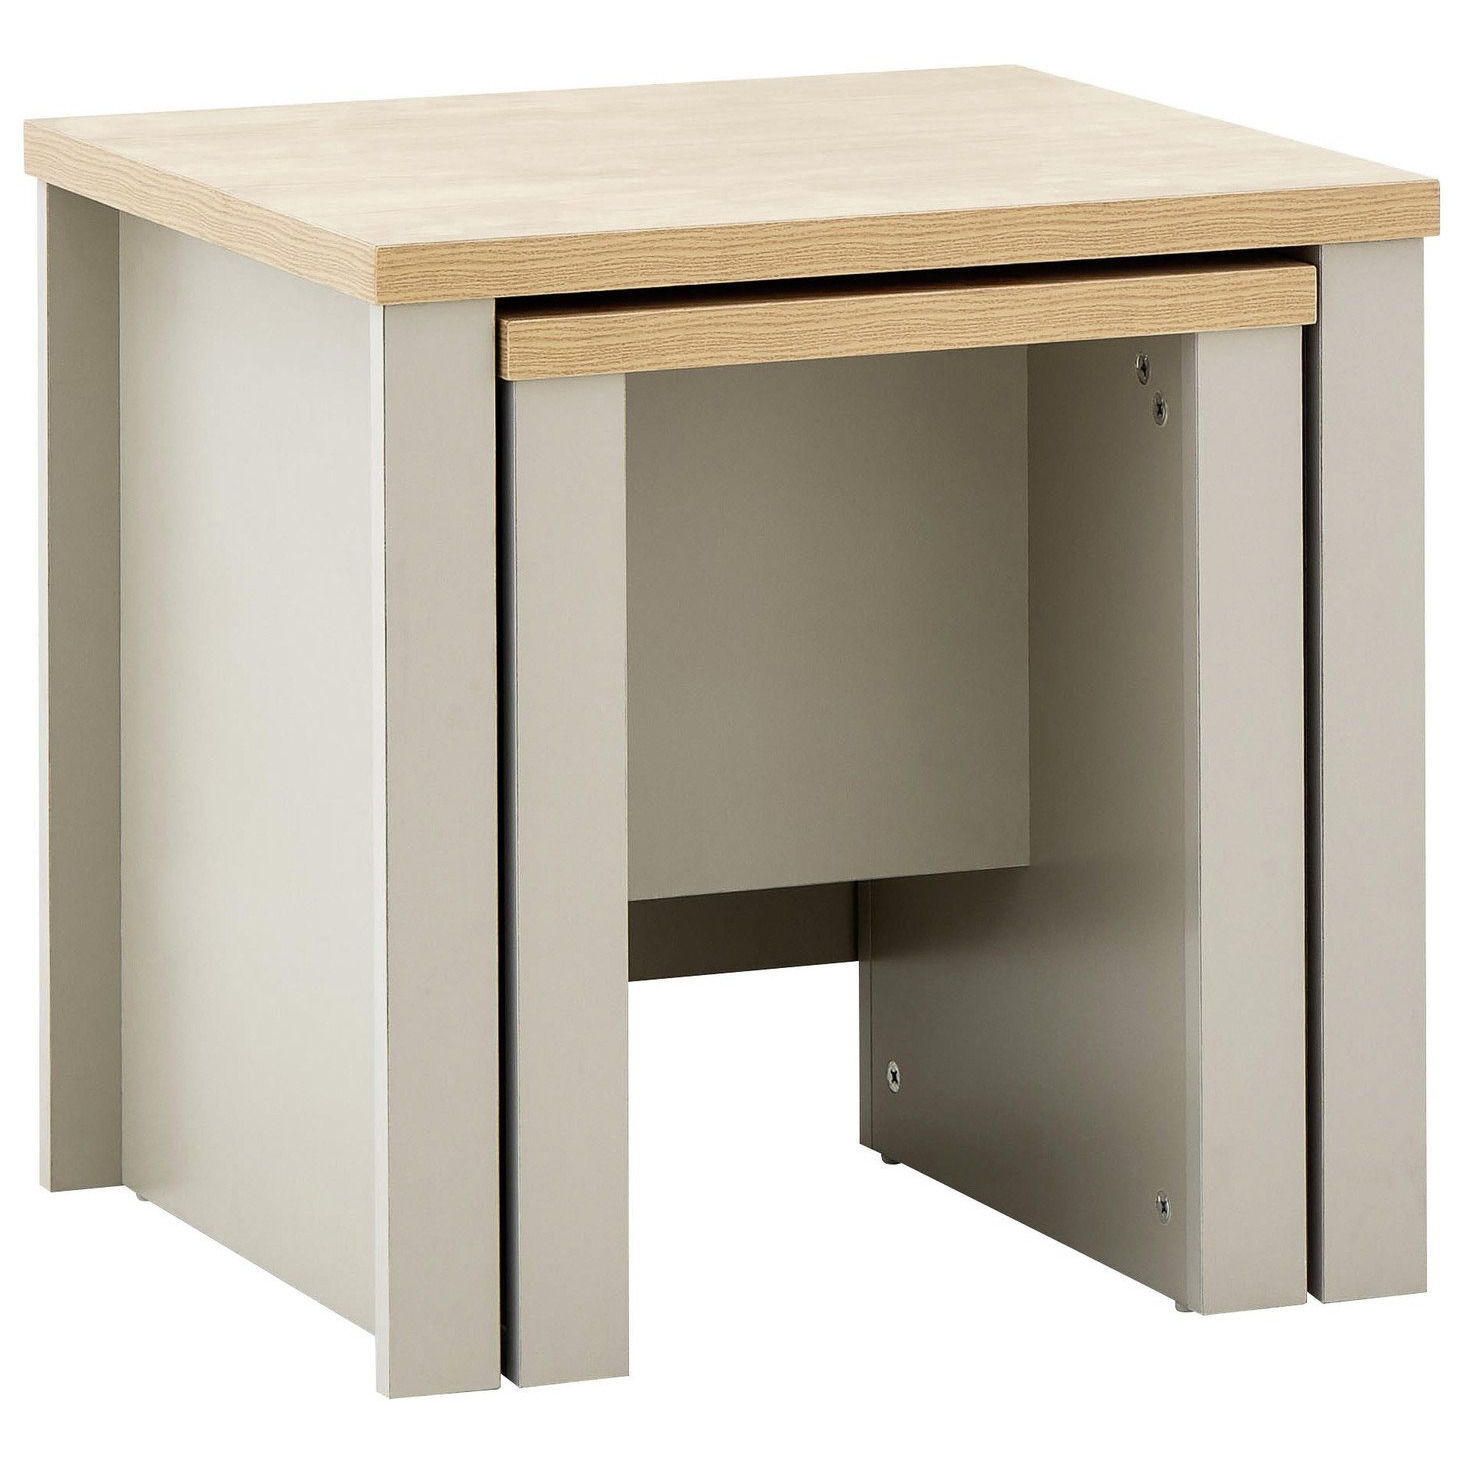 GFW Lancaster Nest of 2 Tables - Grey - image 1